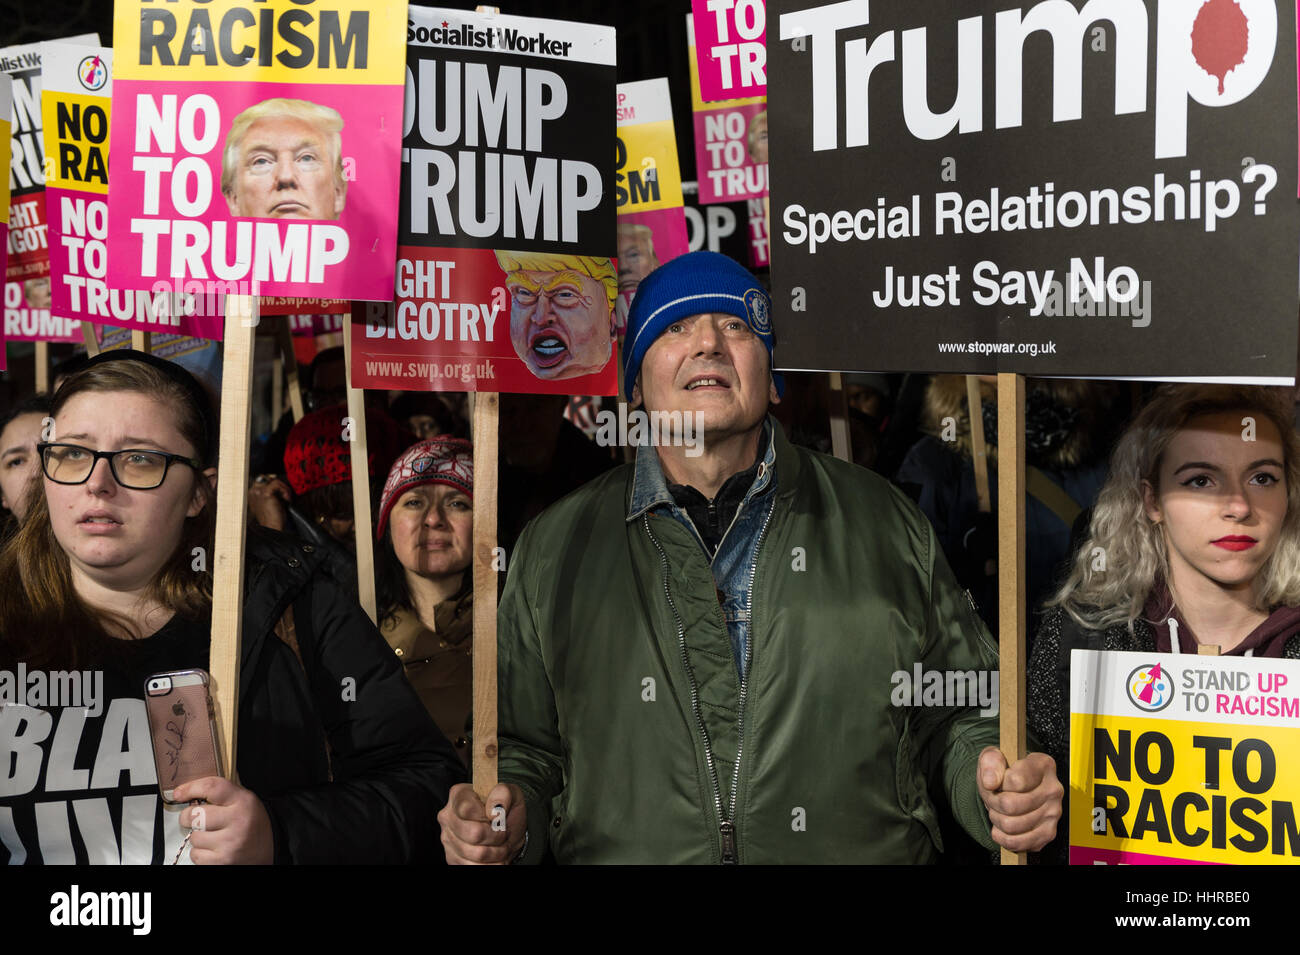 London, UK. 20th January 2017. Hundreds of people gather outside the American embassy in Grosvenor Square to protest against Donald Trump on the day of his inauguration as the 45th President of the United States. The participants demonstrated over Trump's political rhetoric emphasized during the election campaign and his views on issues such as human rights, climate change, racism, immigration and nuclear arms. Credit: Wiktor Szymanowicz/Alamy Live News Stock Photo